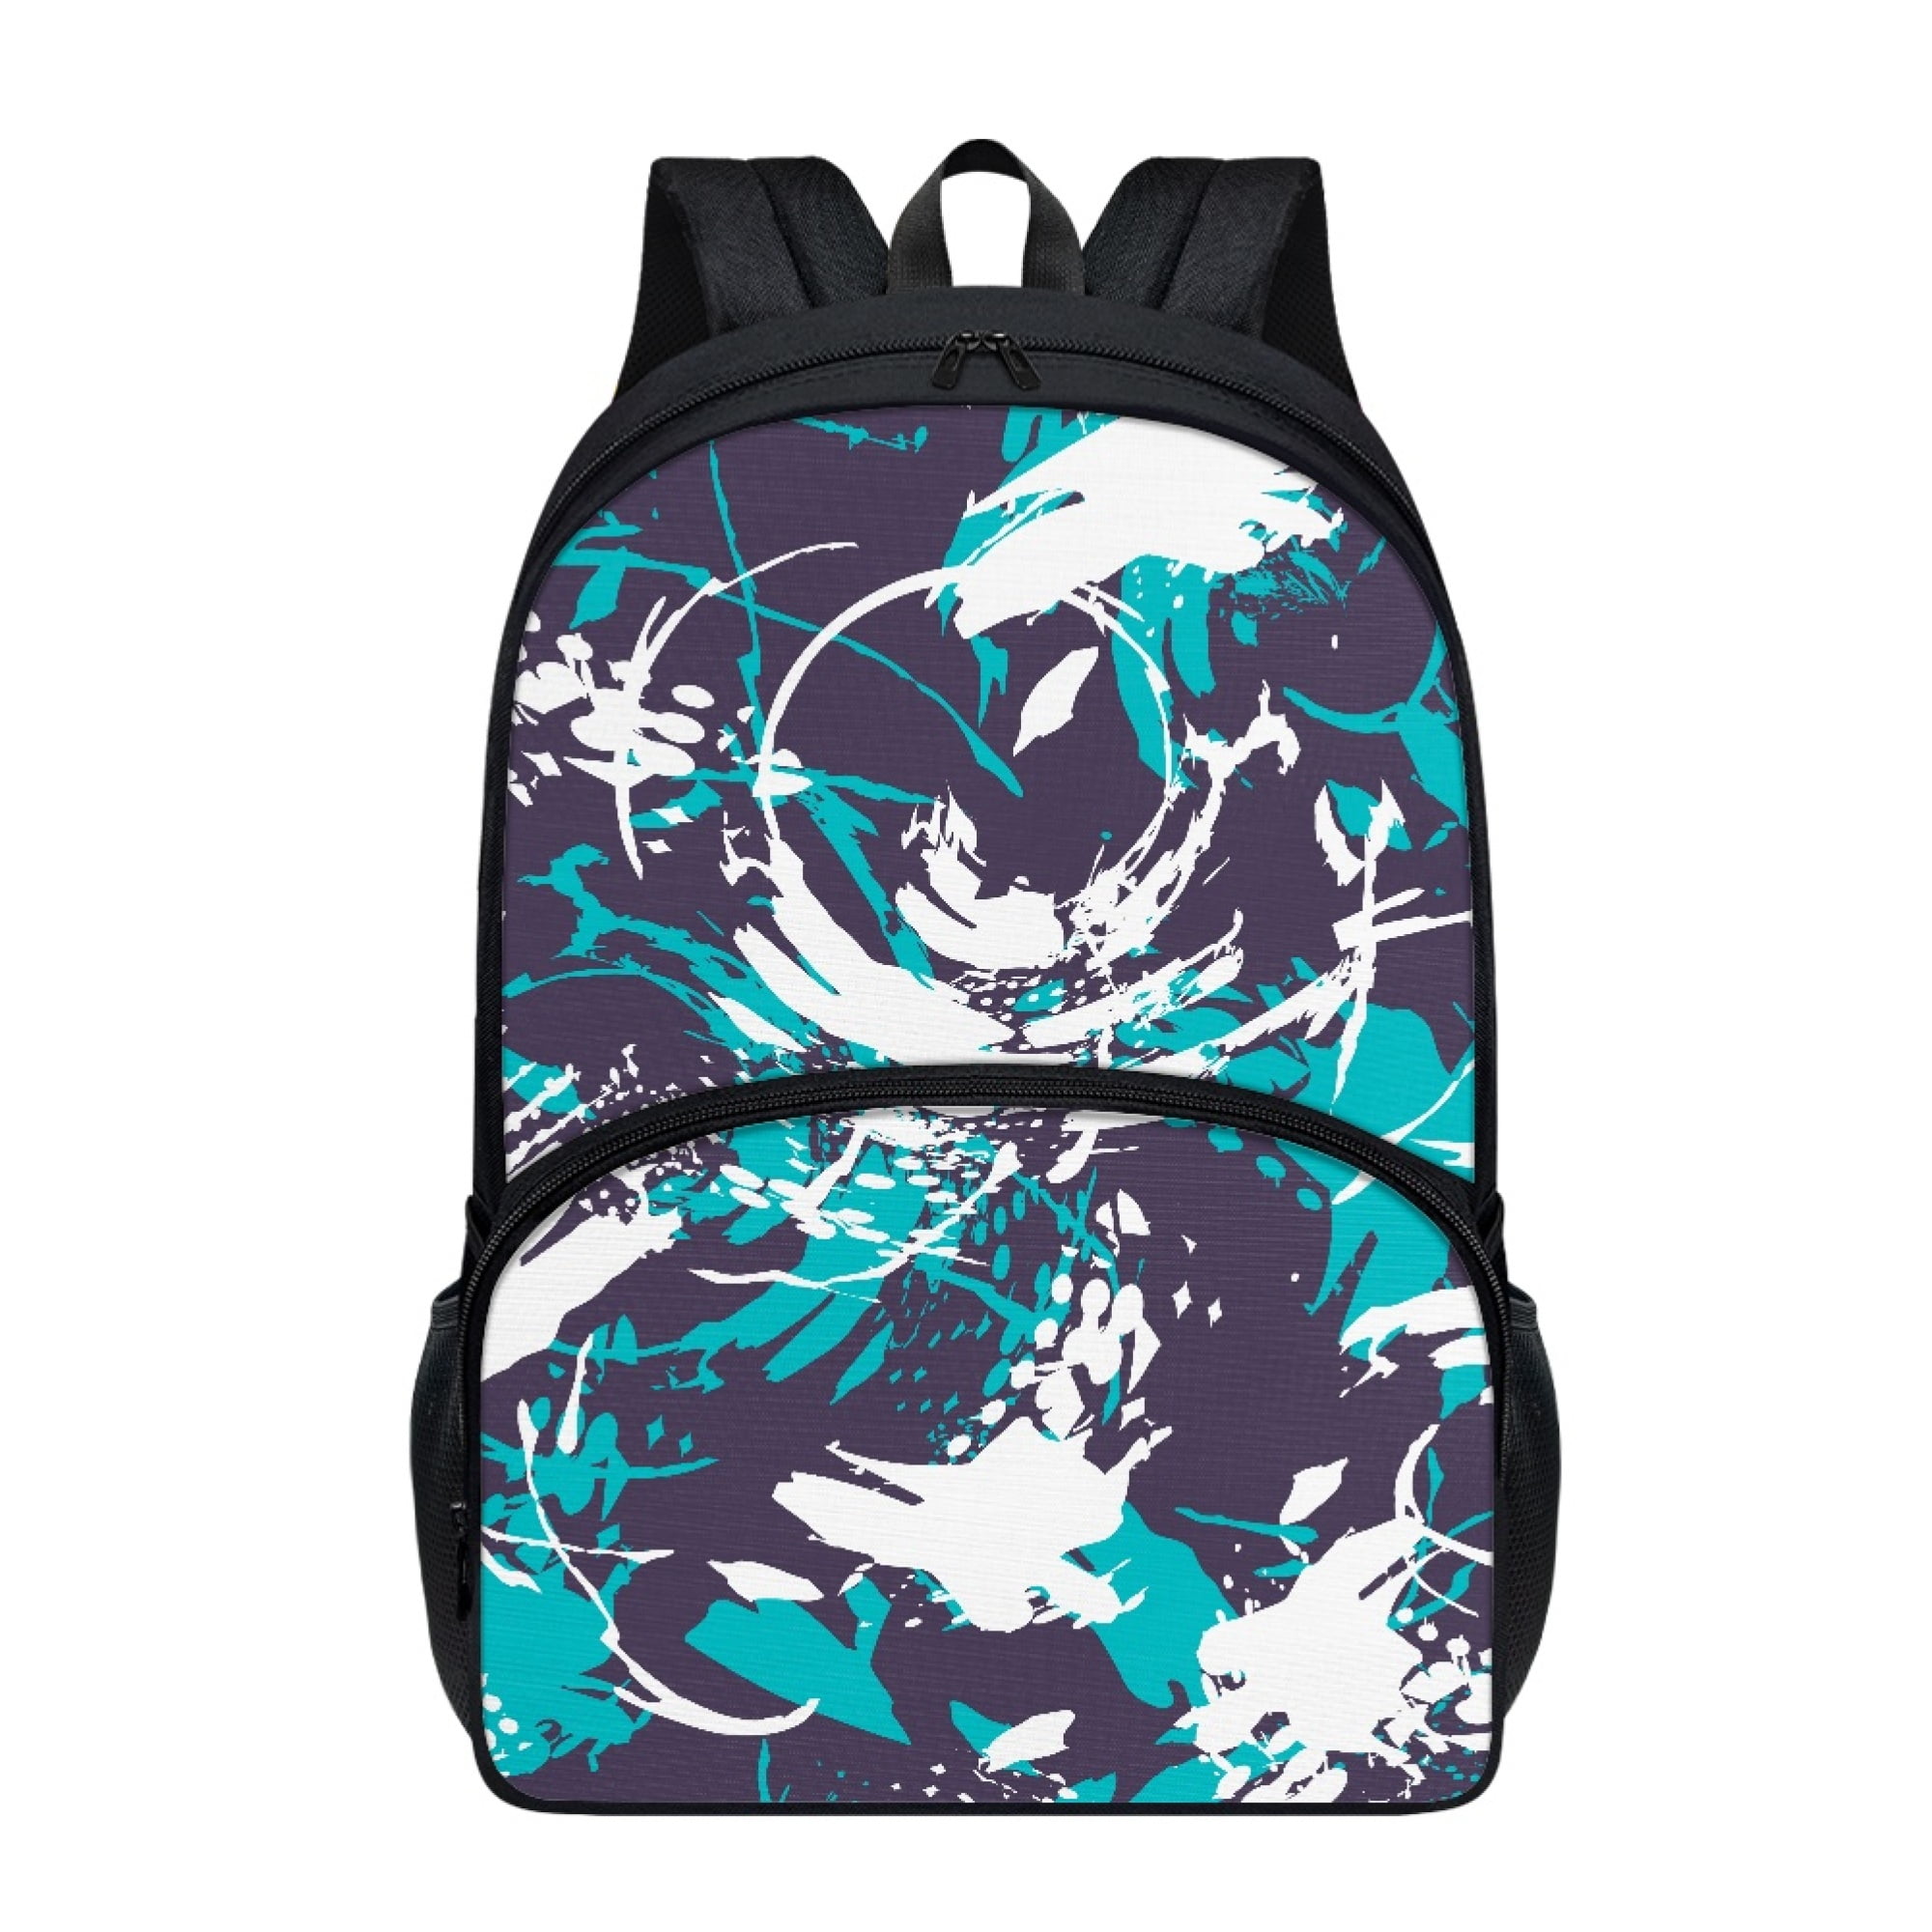 ZOCANIA Spray Paint Backpack for Graffiti Teens Back To School Gifts 17  Inch Laptop Backpack & Insulated Lunch Box & Pencil Case & Name Tag